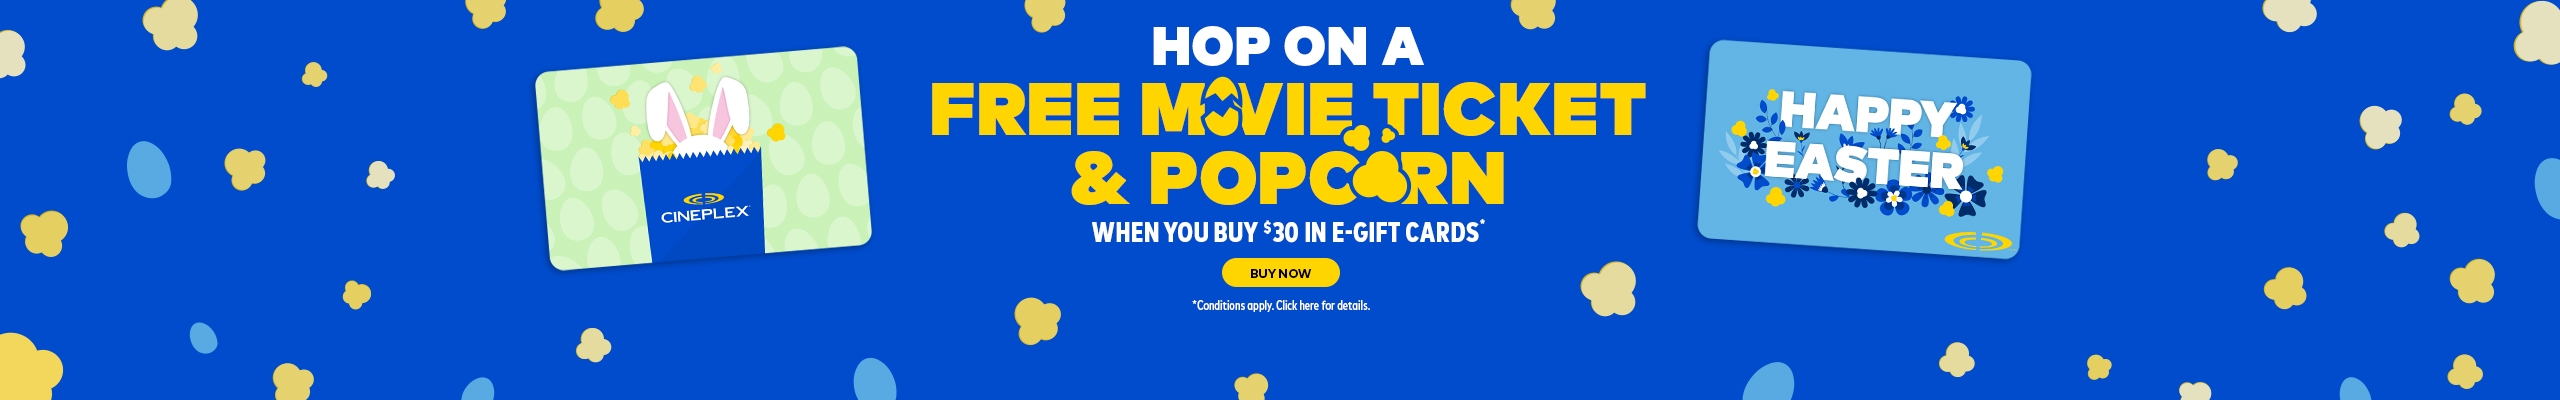 Hop on a free movie ticket and popcorn, when you buy a $30 e-gift card